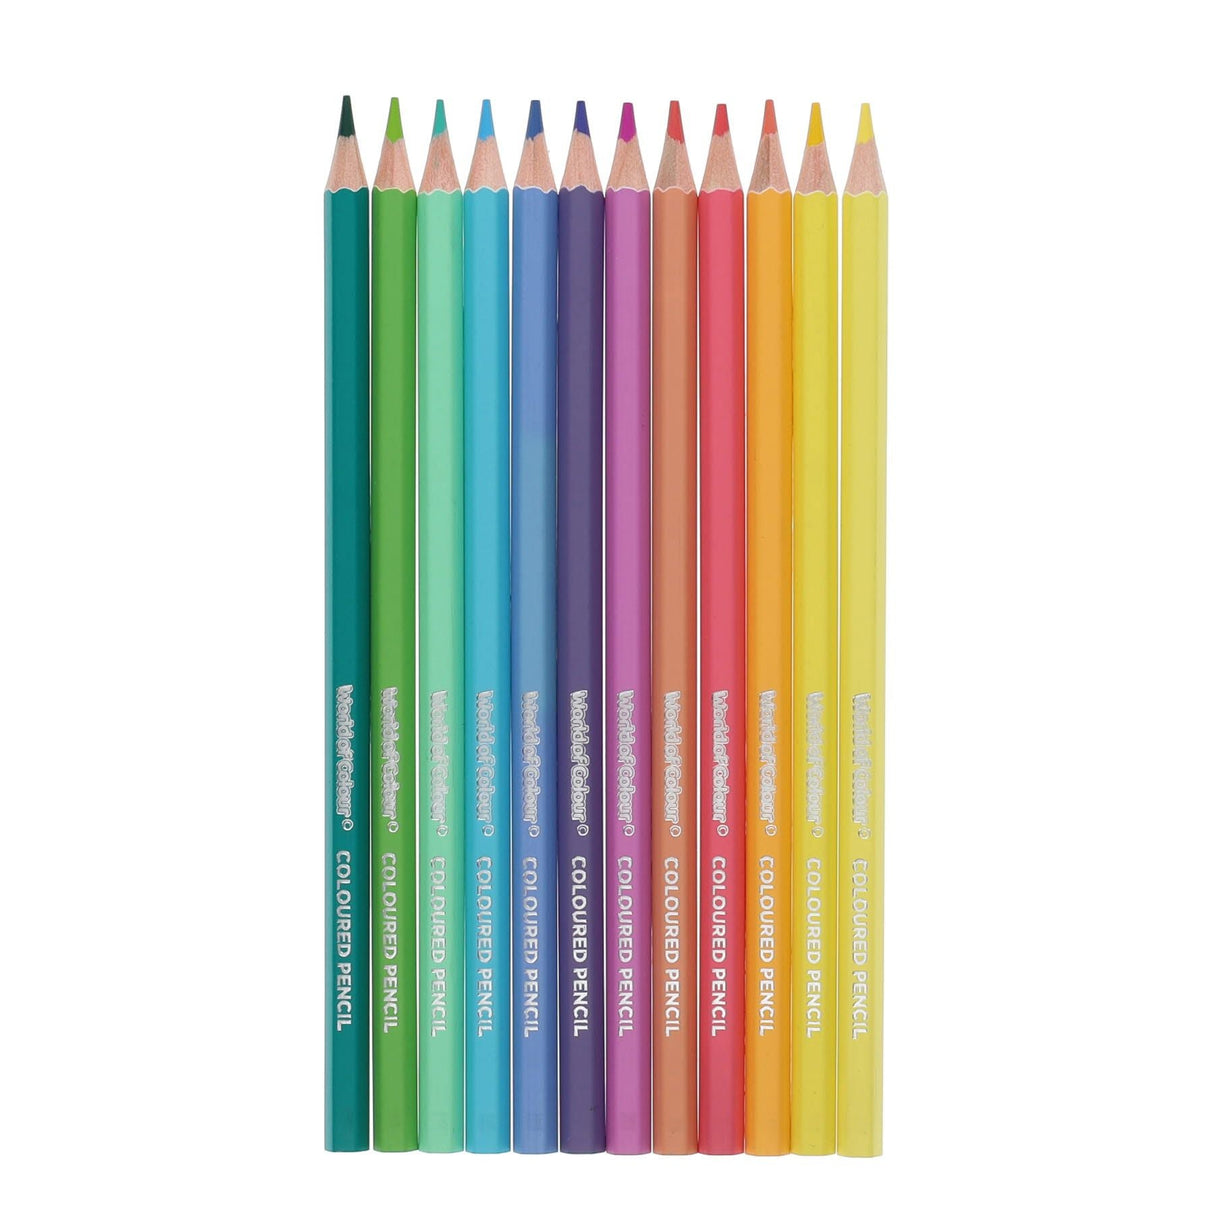 World of Colour Colouring Pencils - Pastel - Pack of 12 | Stationery Shop UK